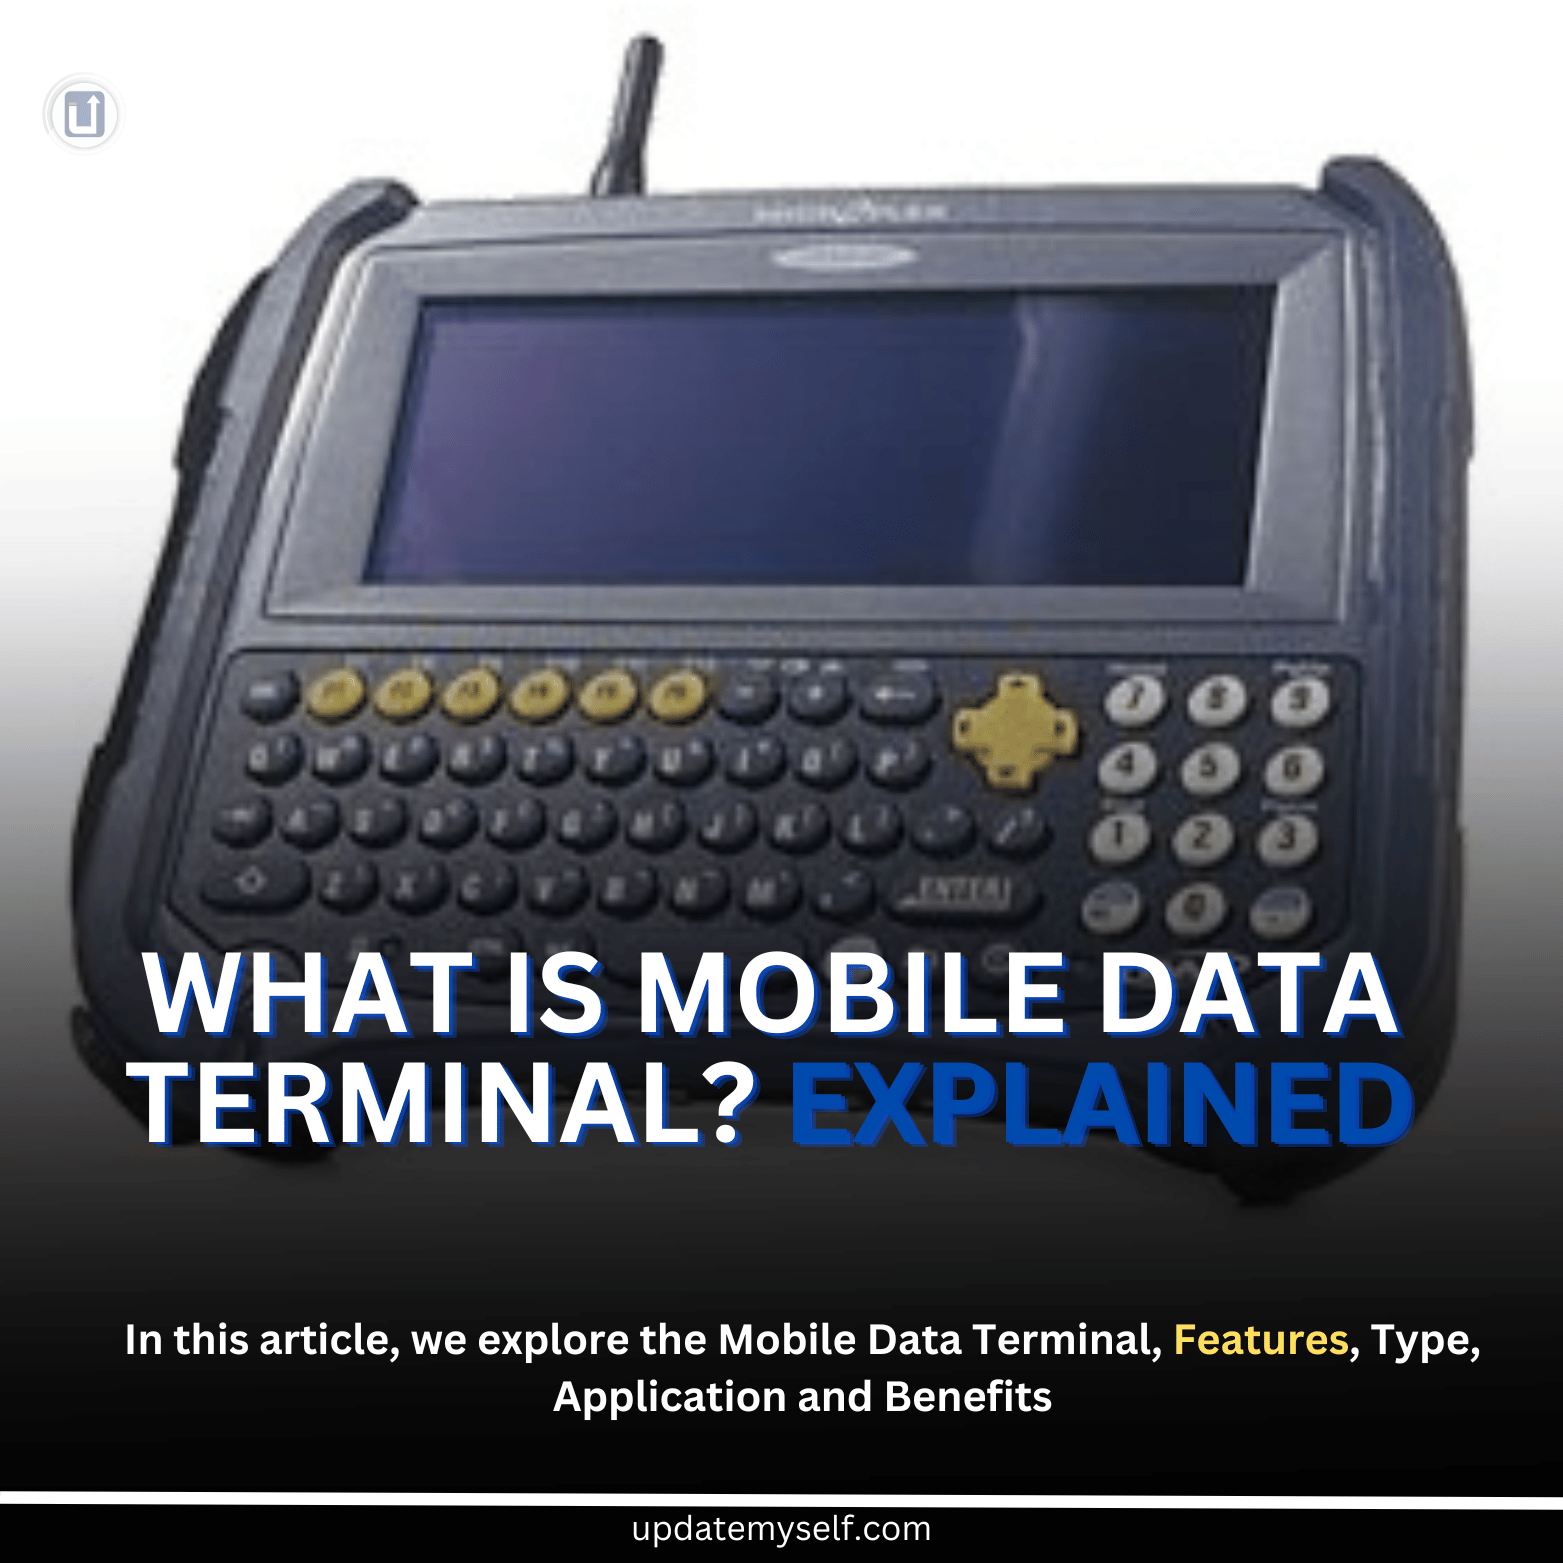 What is Mobile Data Terminal?